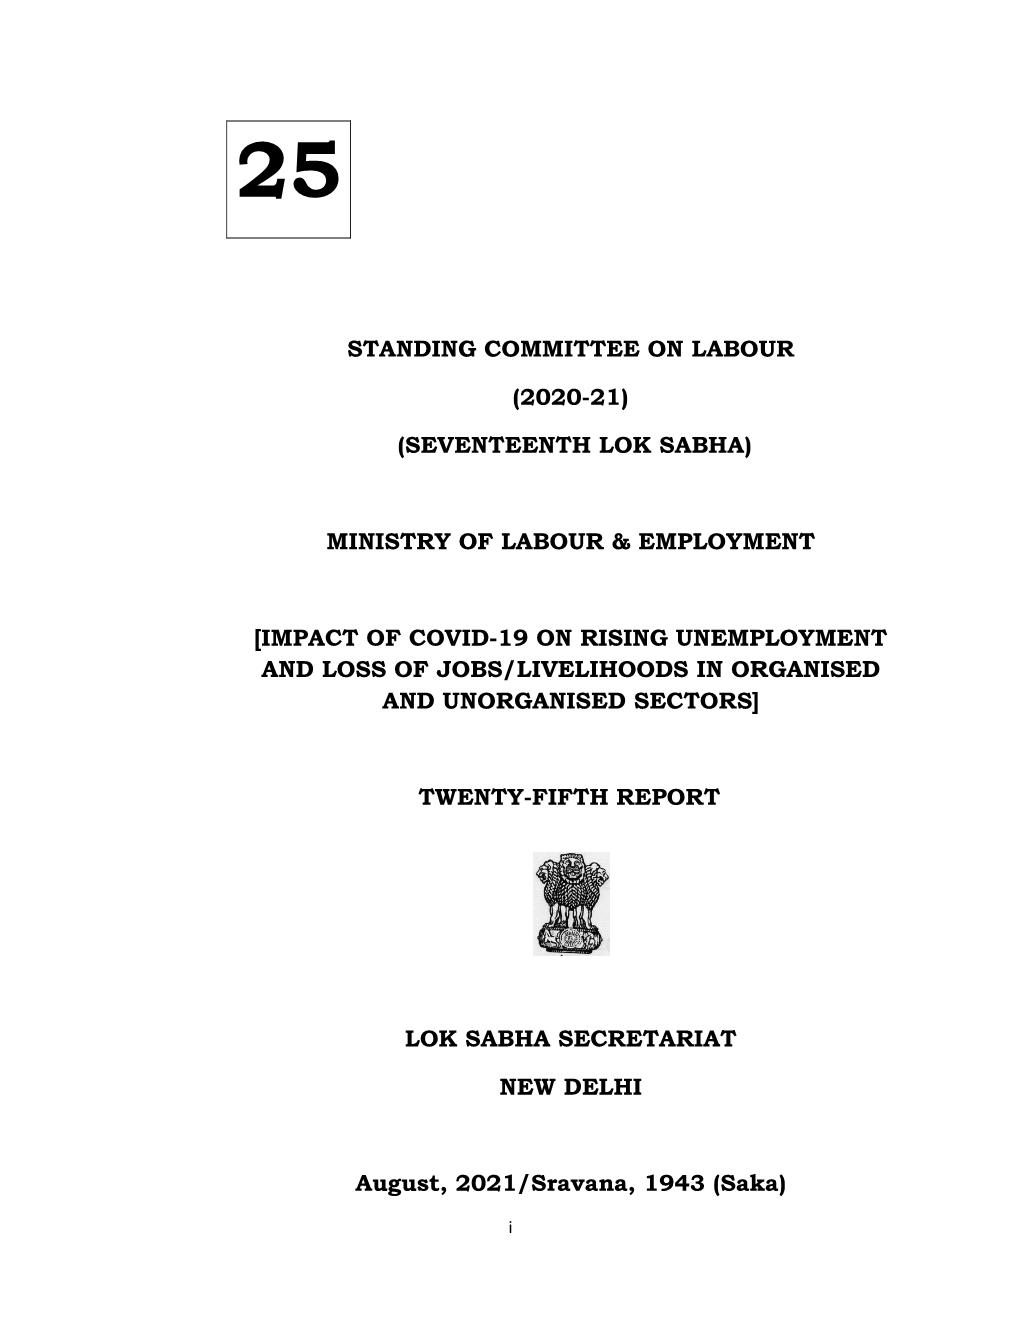 Impact of Covid-19 on Rising Unemployment and Loss of Jobs/Livelihoods in Organised and Unorganised Sectors]